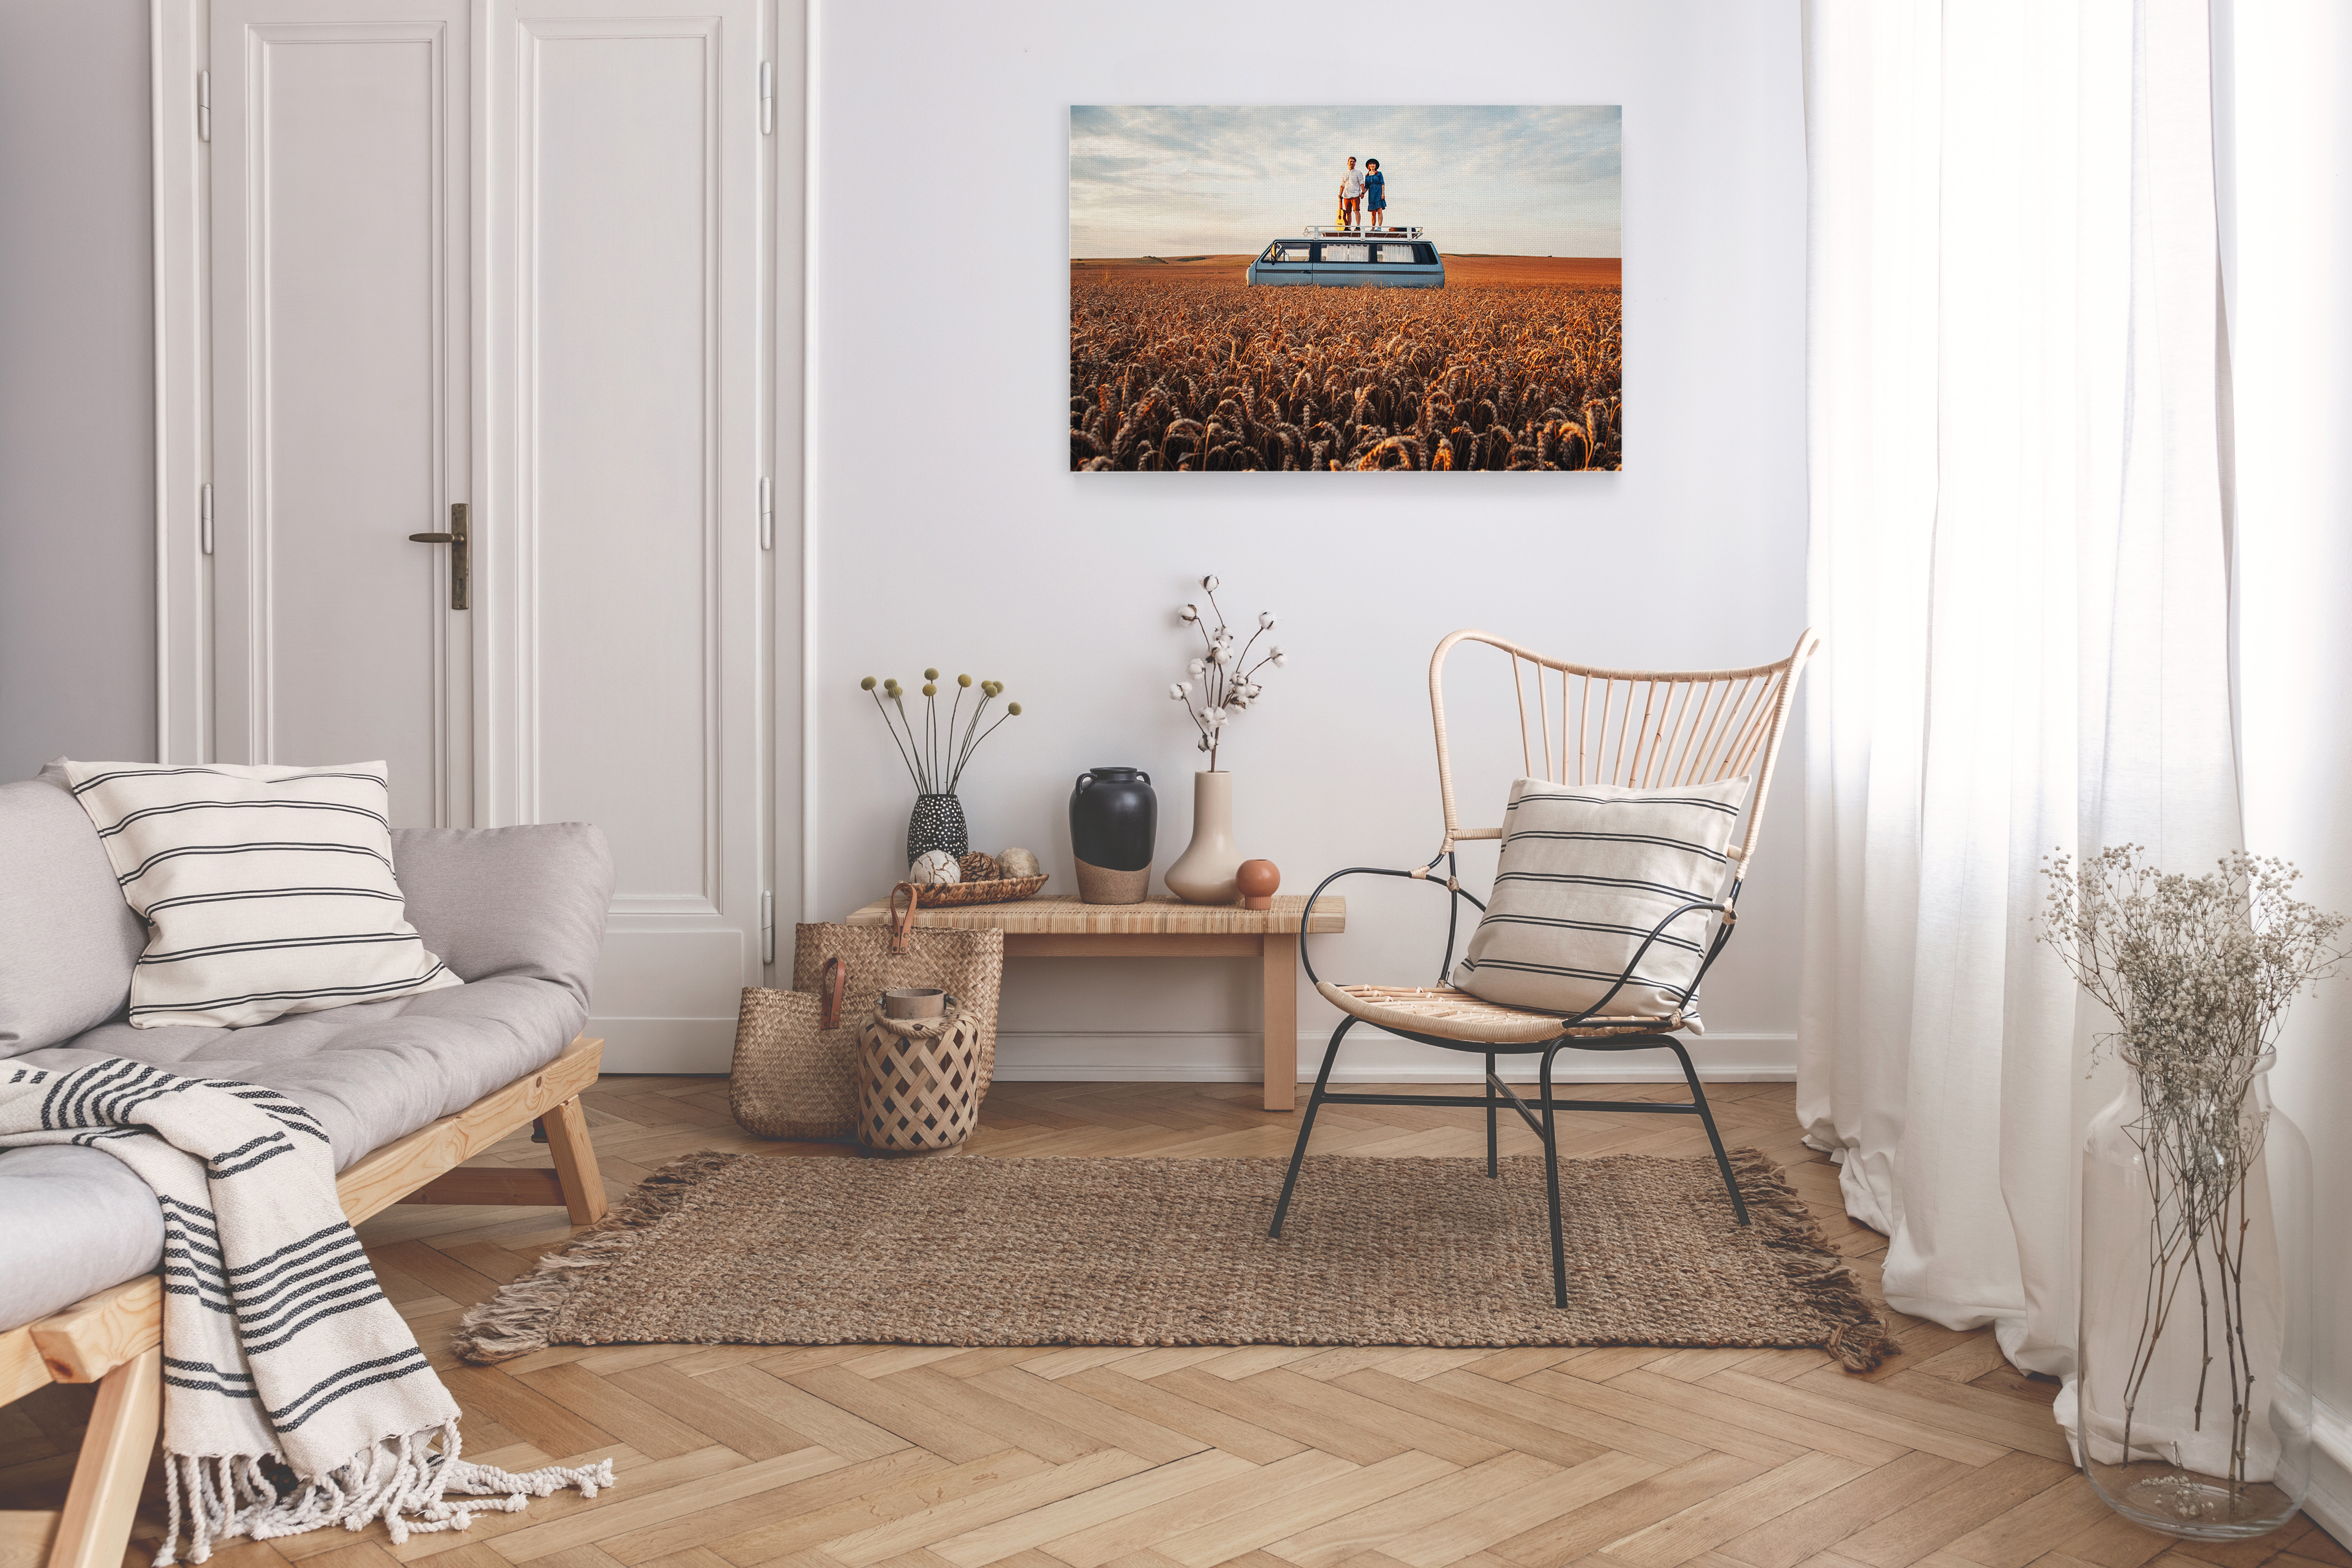 Canvas print of couple in a field with RV in living room